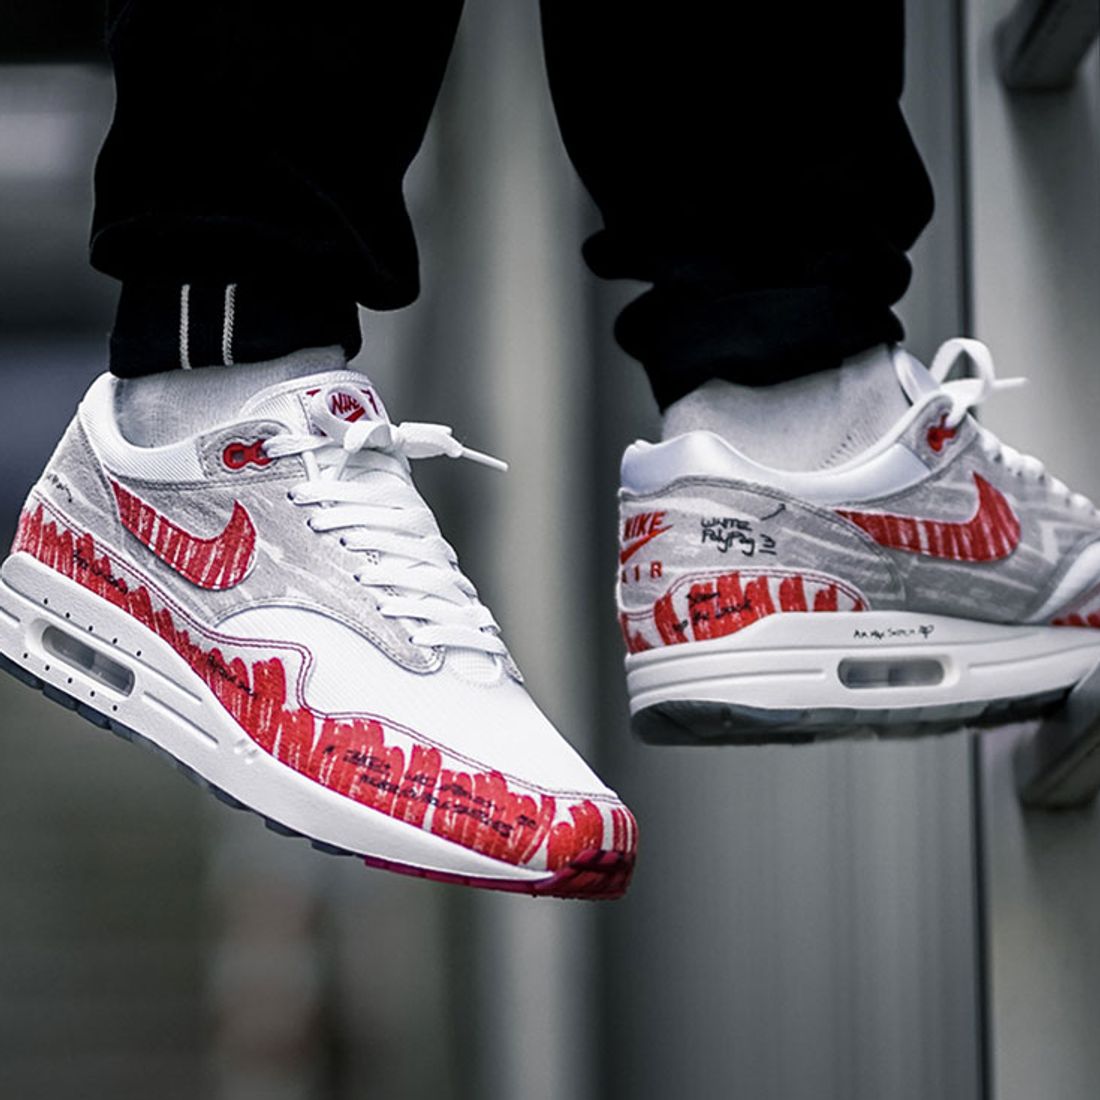 Integratie Clancy totaal Here's How People are Styling the Nike Air Max 1 'Sketch to Shelf' -  Sneaker Freaker